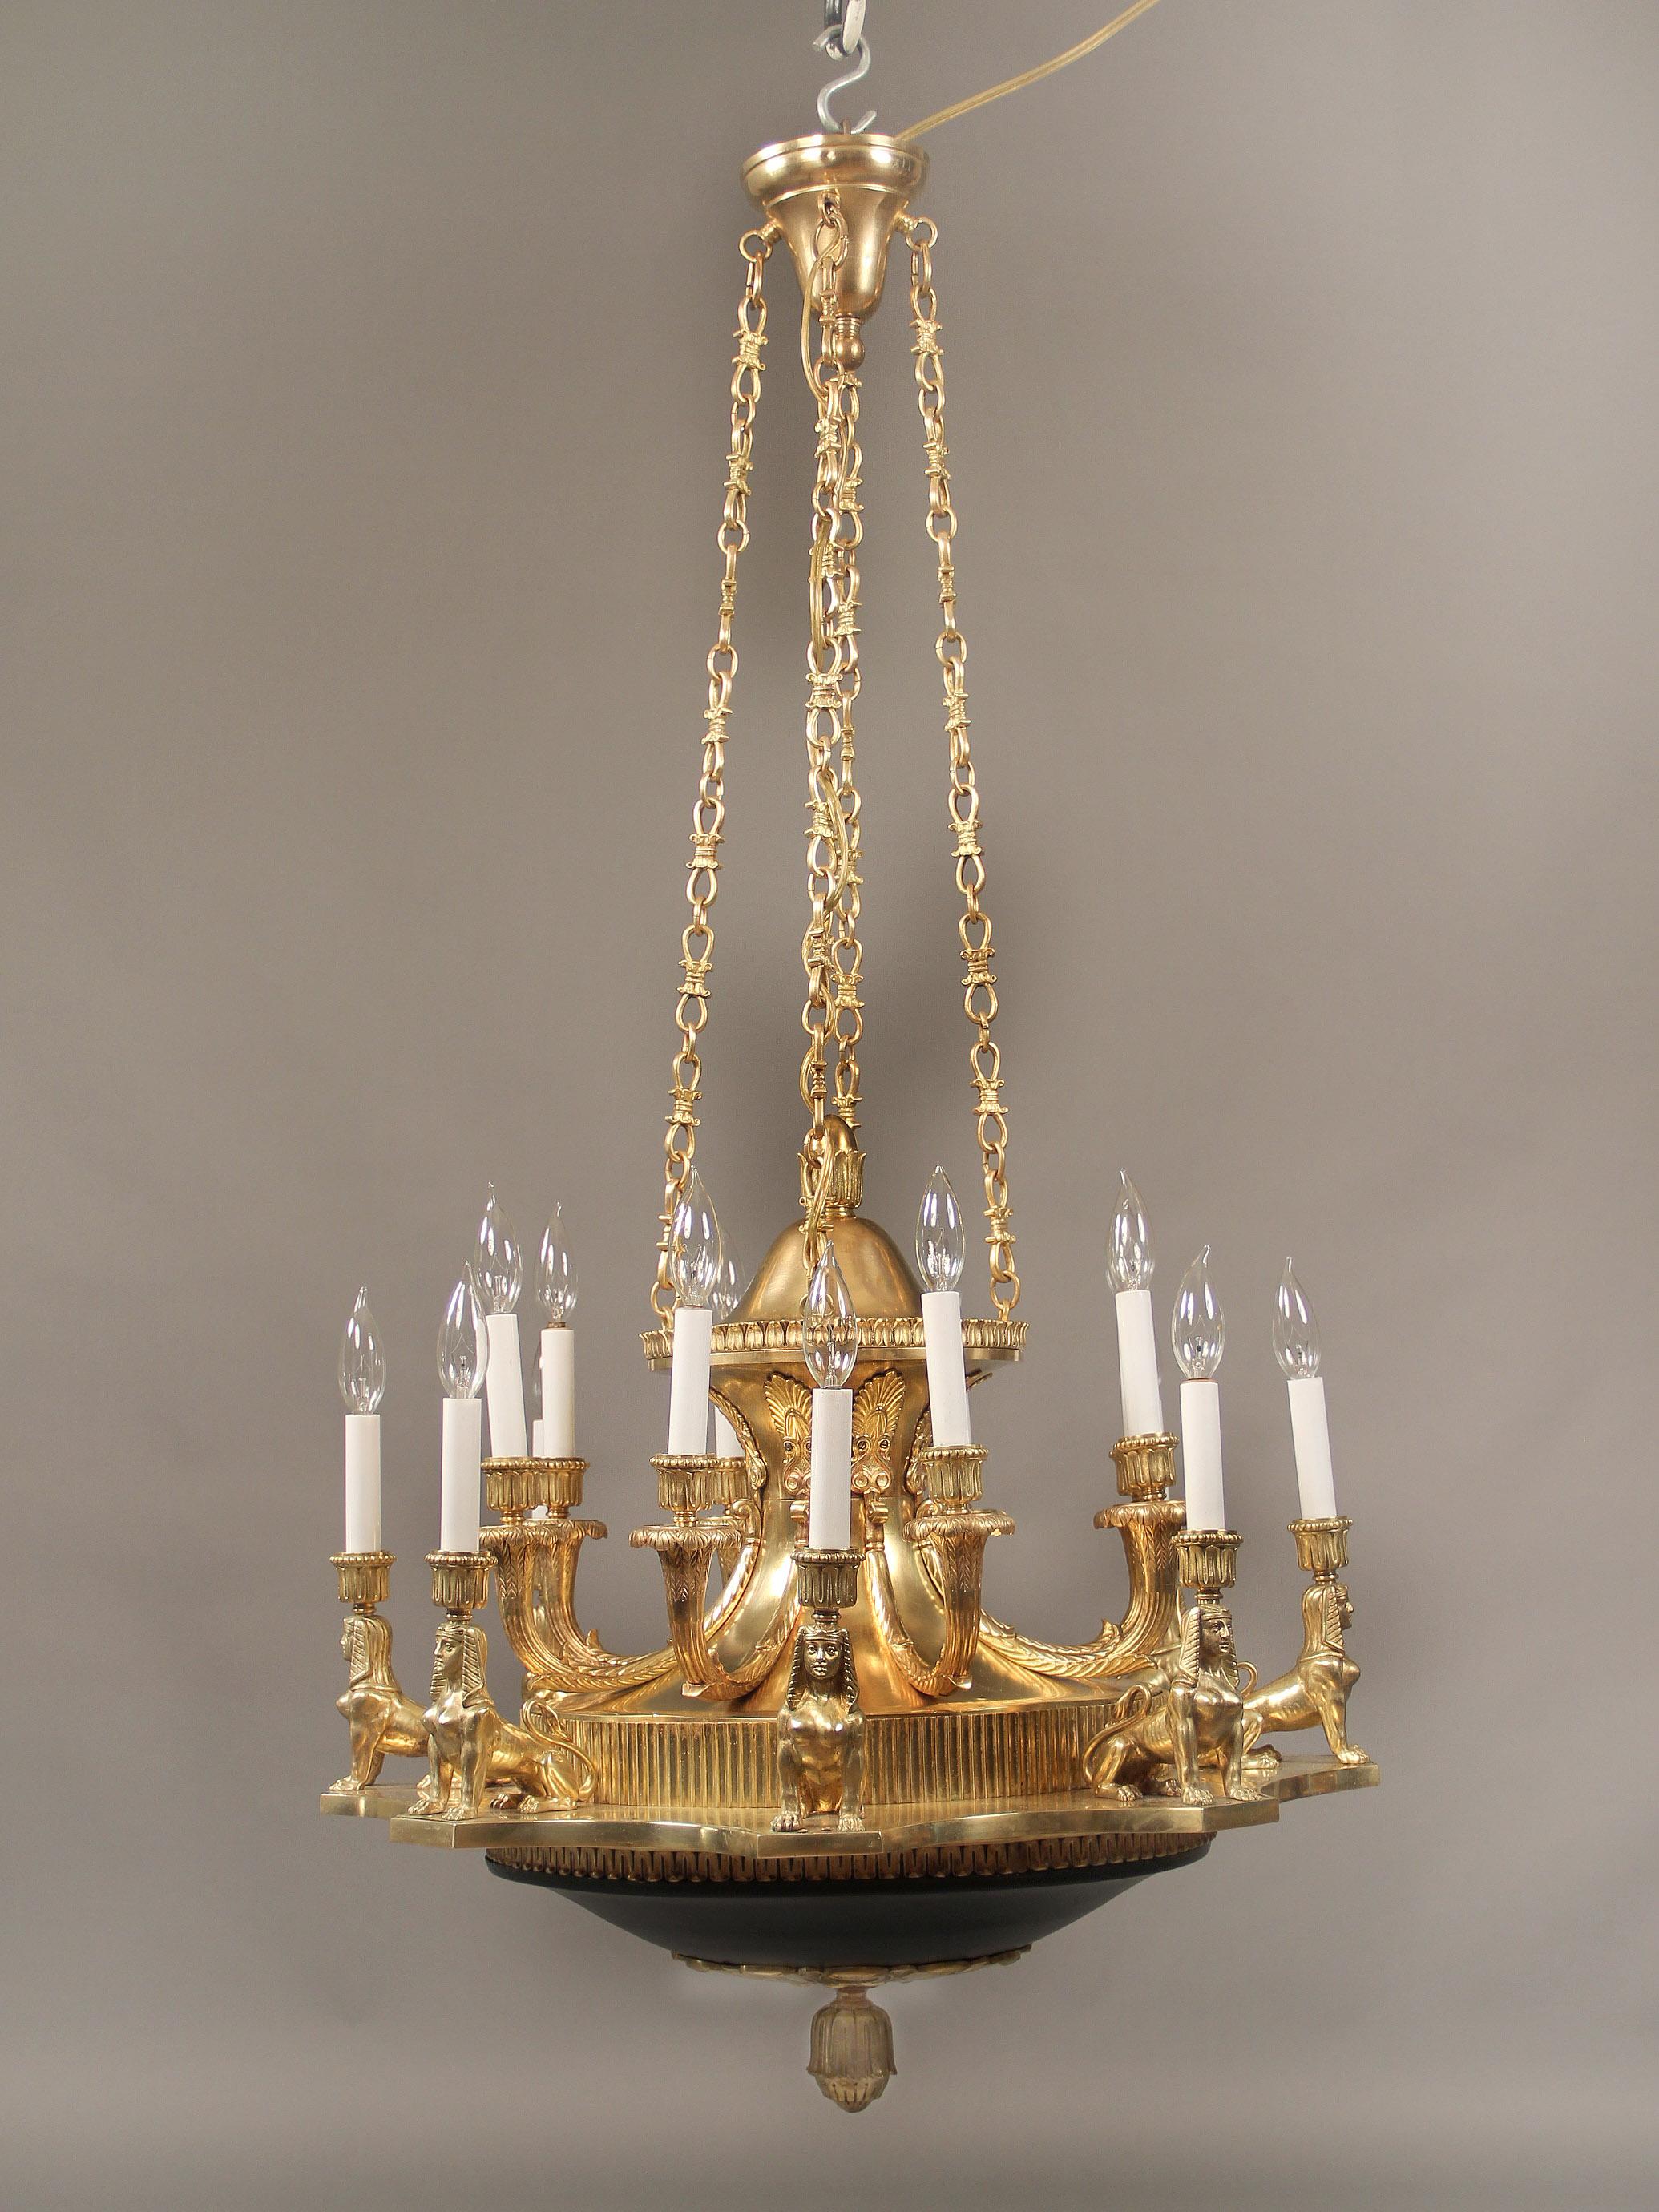 An interesting late 19th-early 20th century gilt bronze empire style sixteen light chandelier

Four long chains connect the top with the body, eight gilt sphinx encircle and light up the exterior along with eight tiered lights on the inside, the